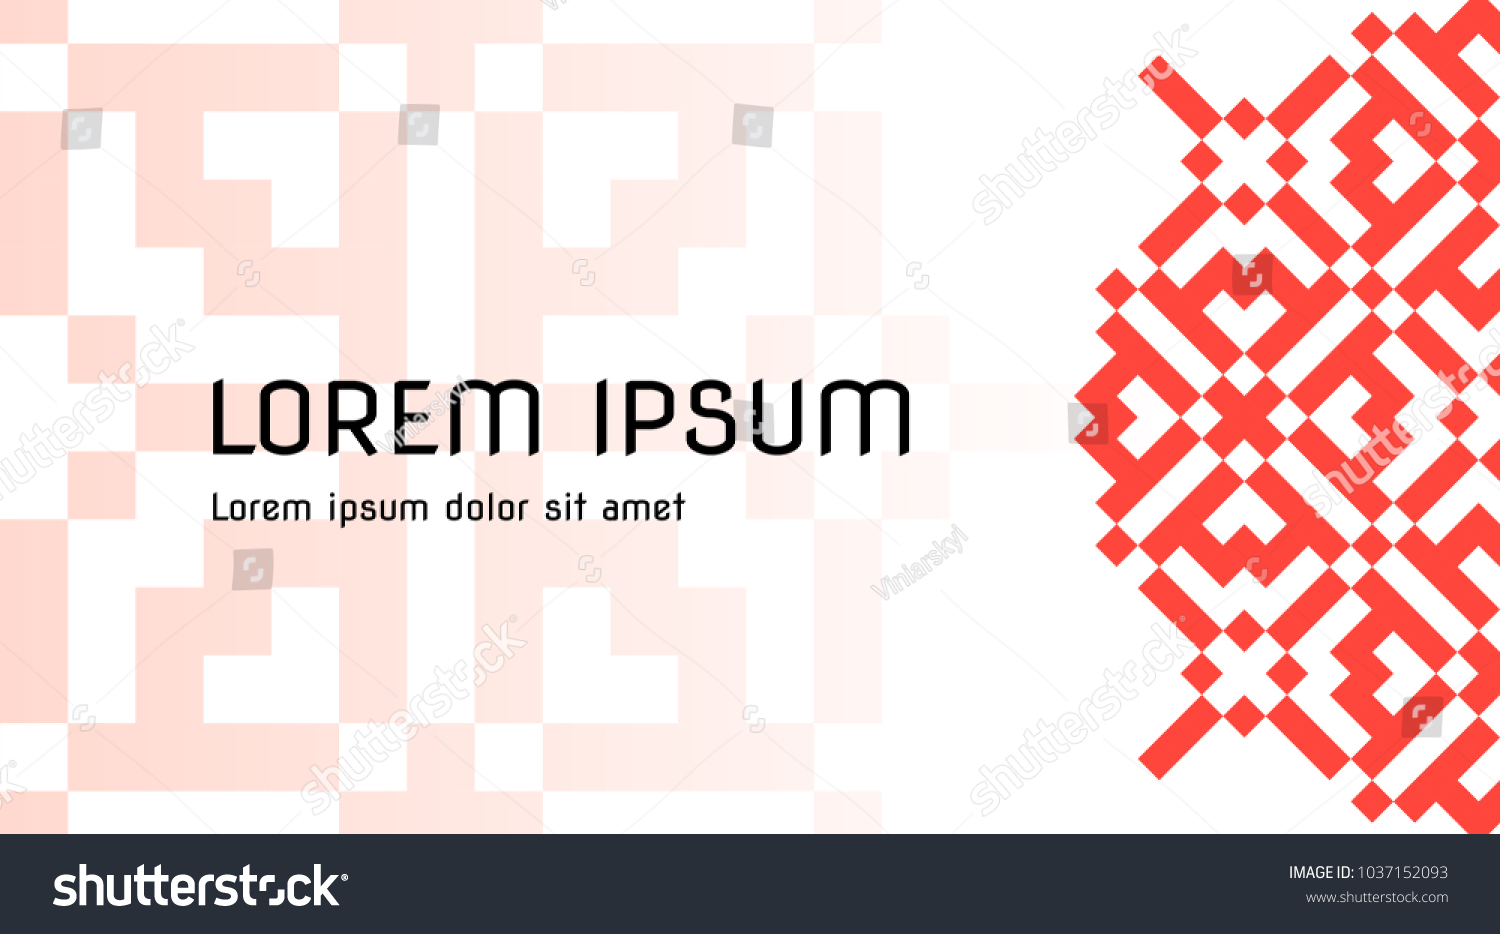 SVG of vector background for business cards, invitations and presentations. ukrainian ornament on the right hand svg